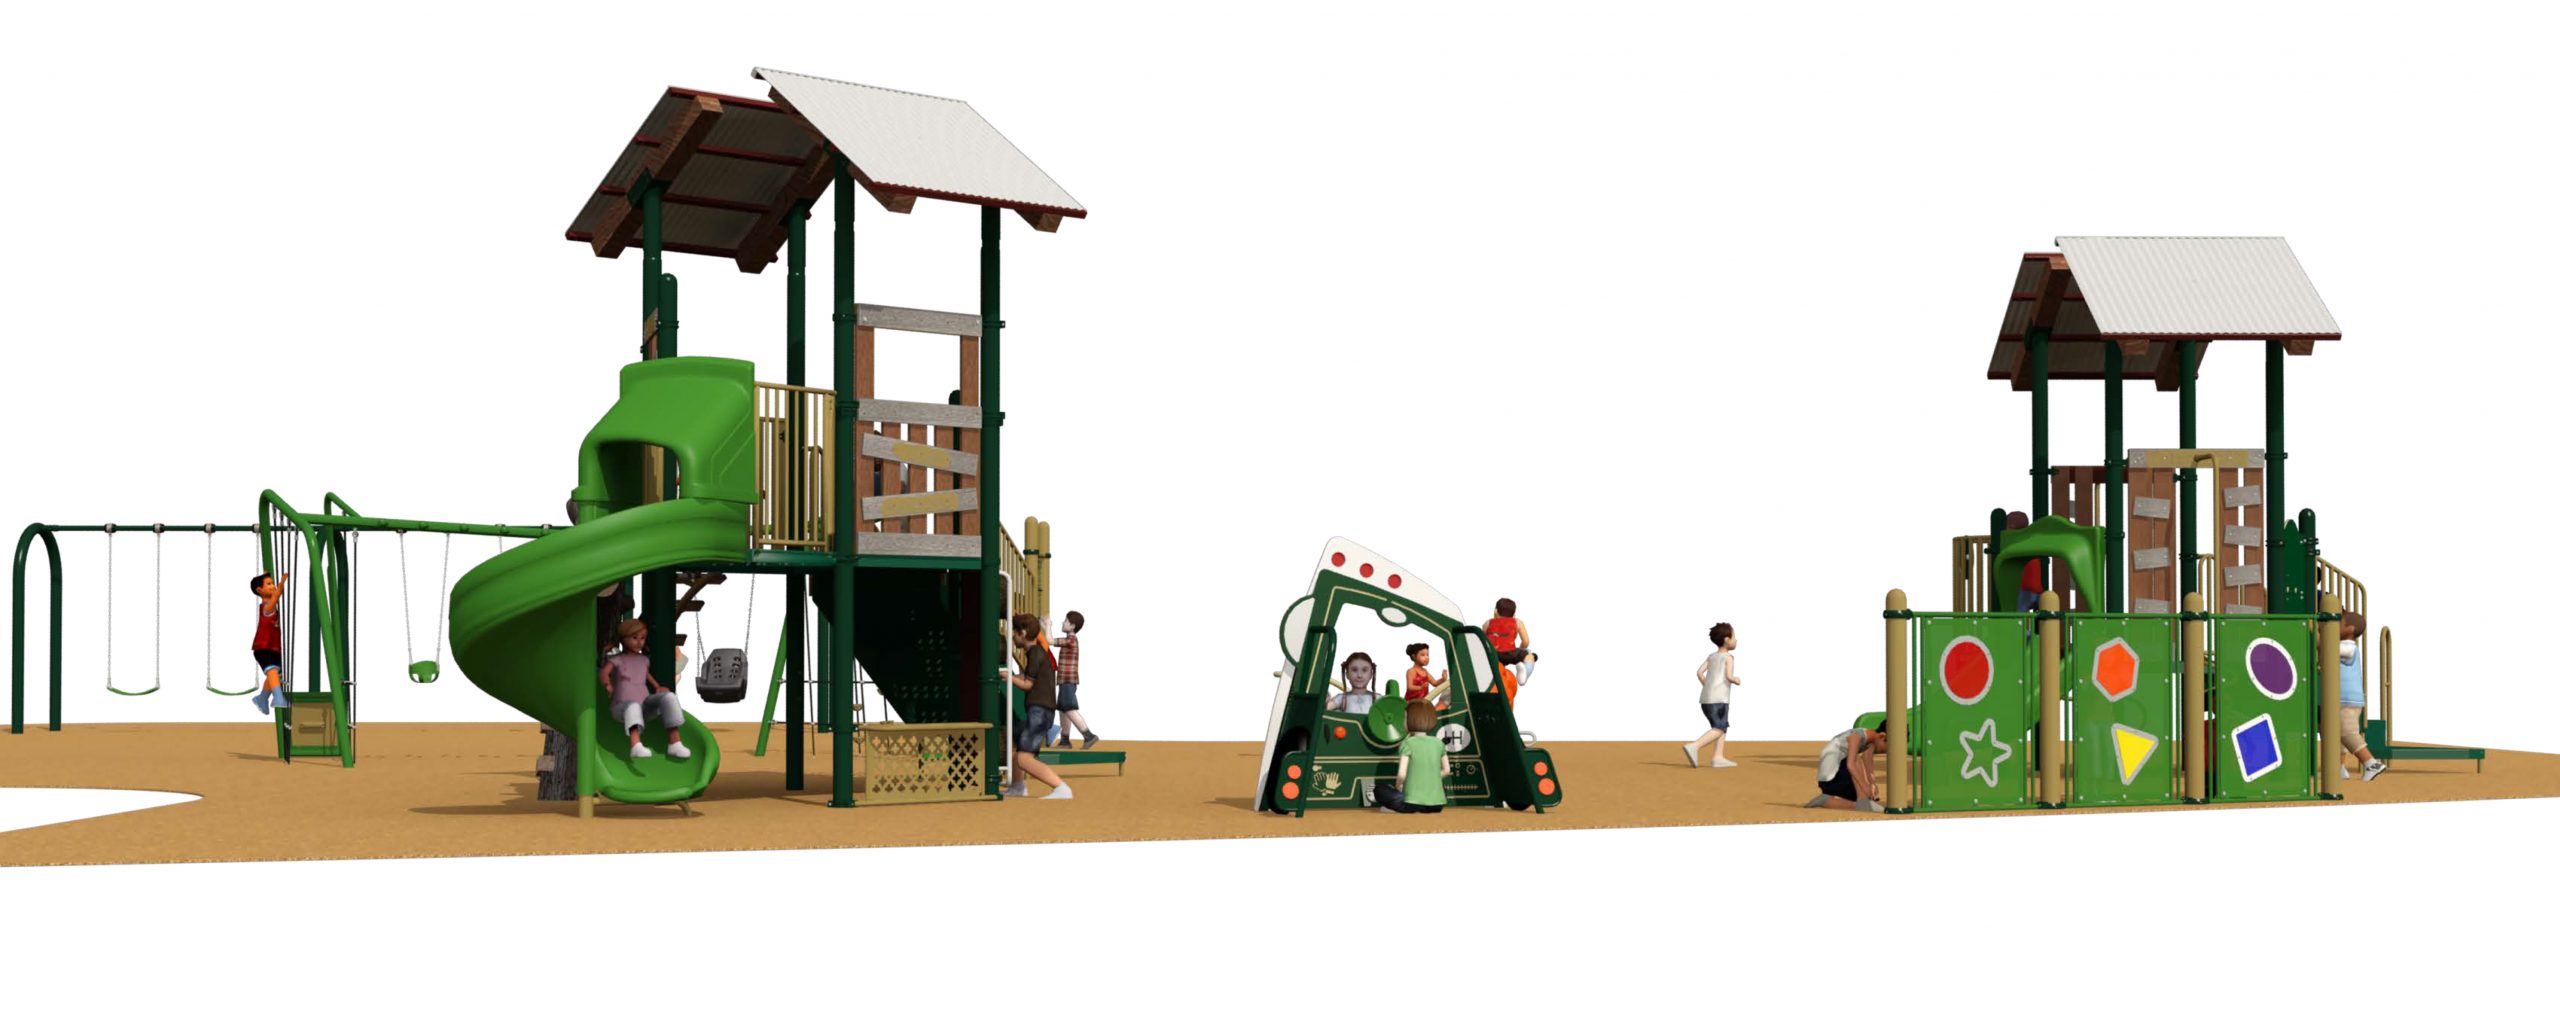 A rendering of Playground Equipment Option 2 looking towards the southwest at eye level. The structures are shown in beige, dark green, and green and include the features described below.